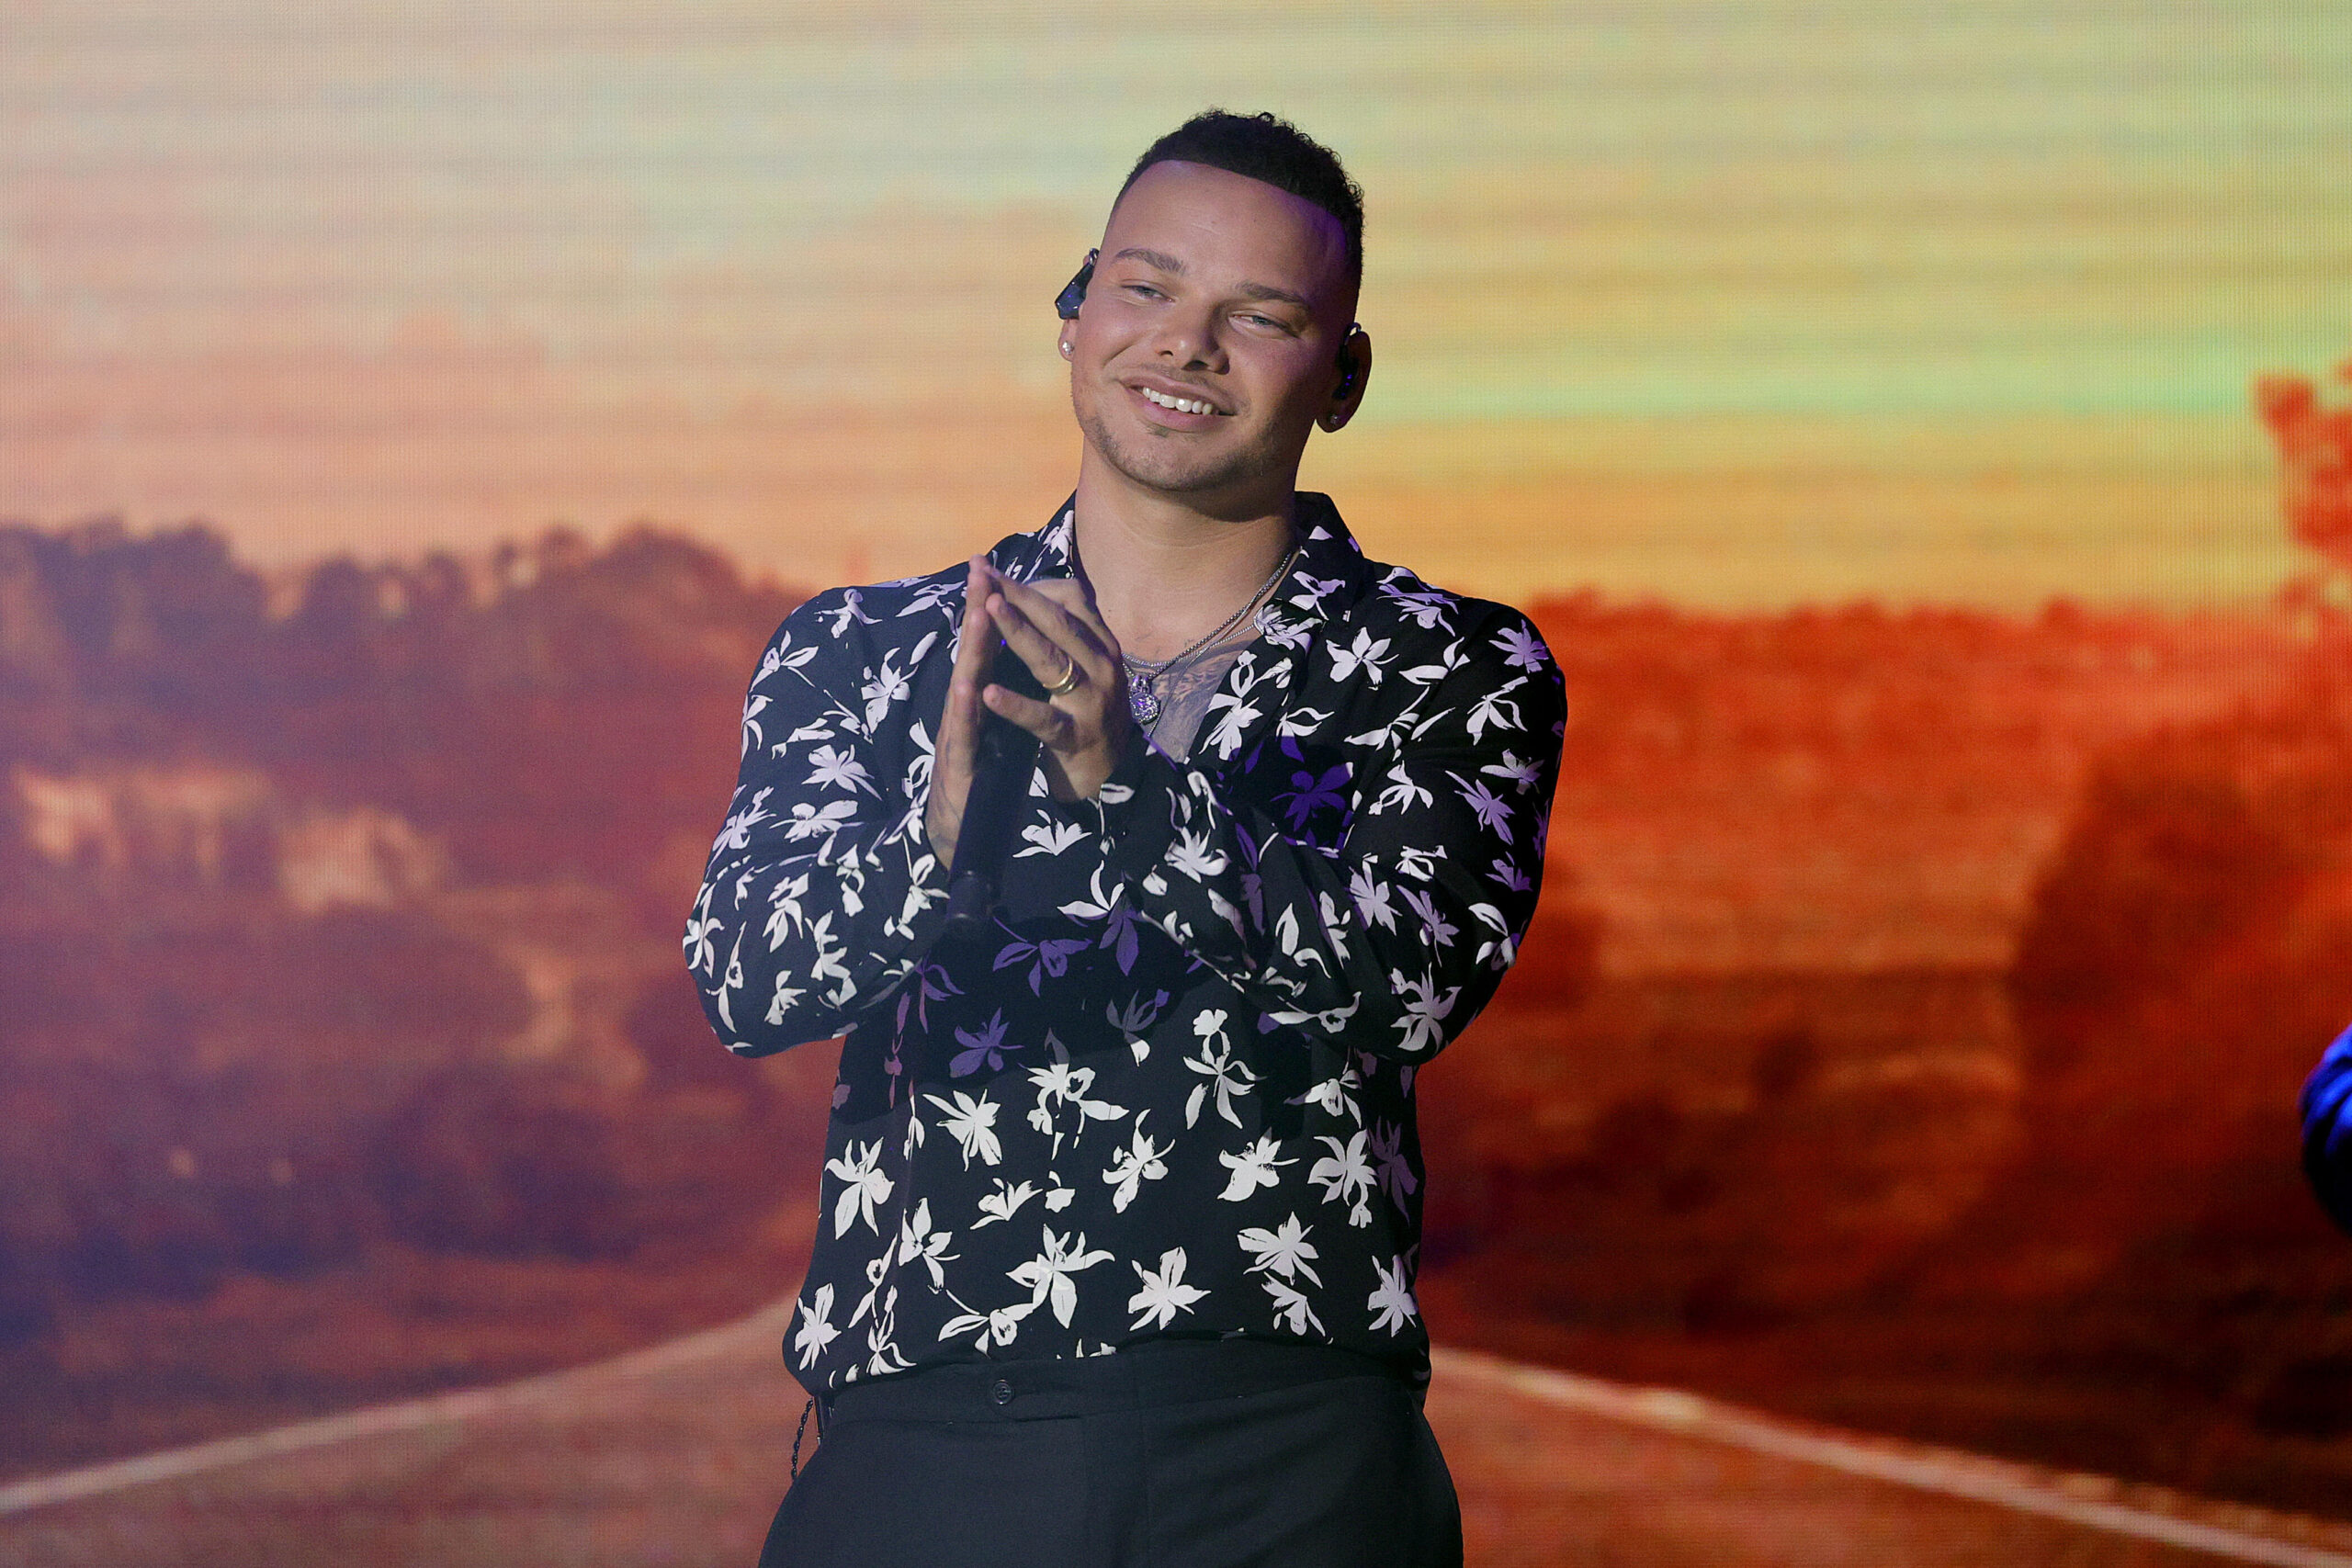 Kane Brown Set To Co-Host “A Home For The Holidays” TV Special This Weekend